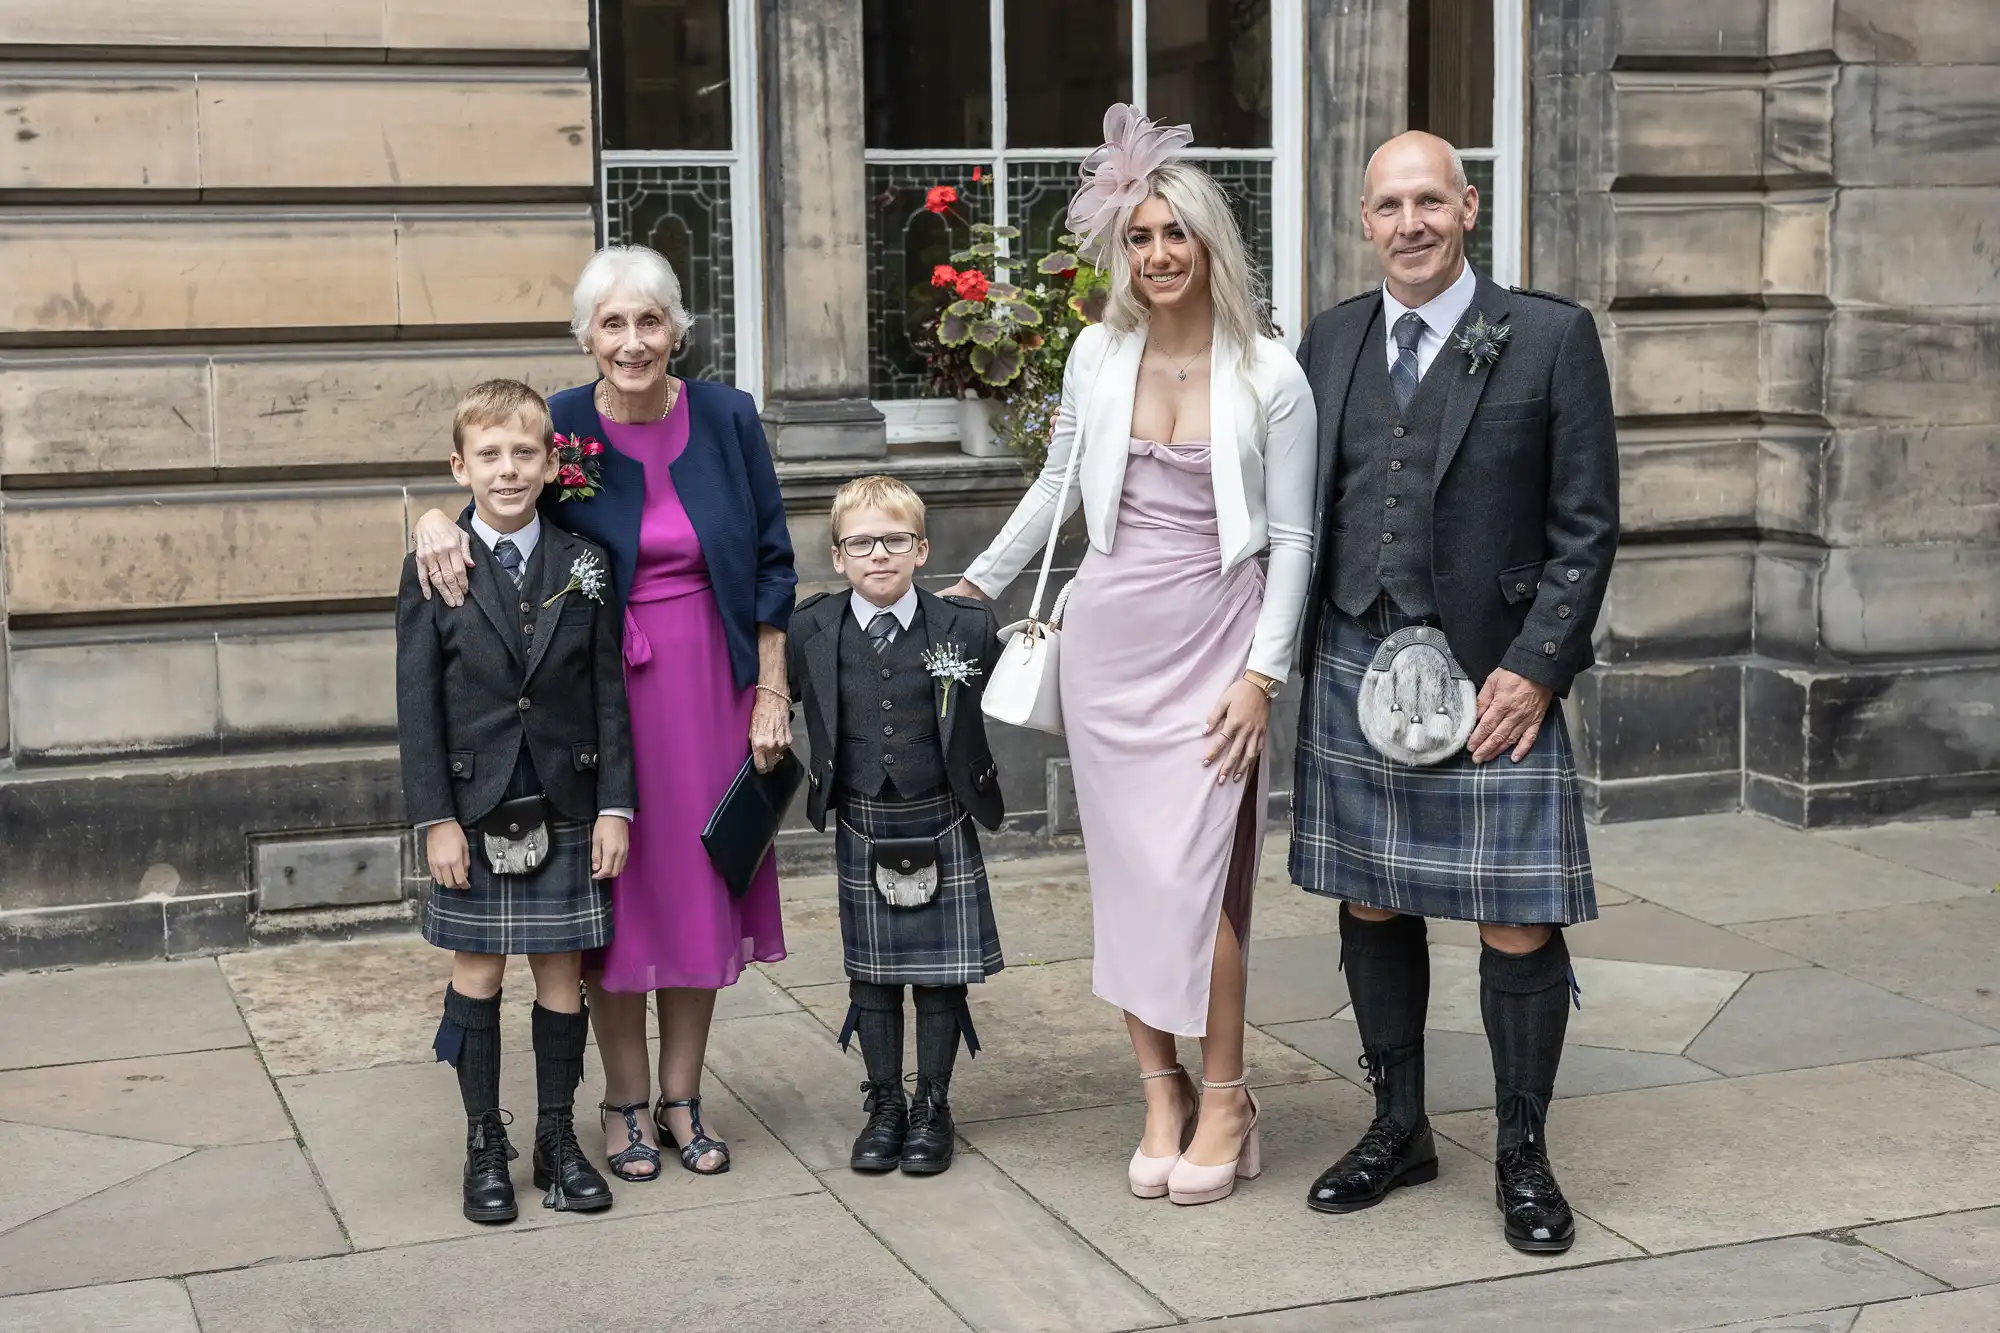 A family dressed in formal attire, with two men and two young boys in kilts, an elderly woman in a purple dress, and a woman in a pink dress and white jacket, standing outside a stone building.